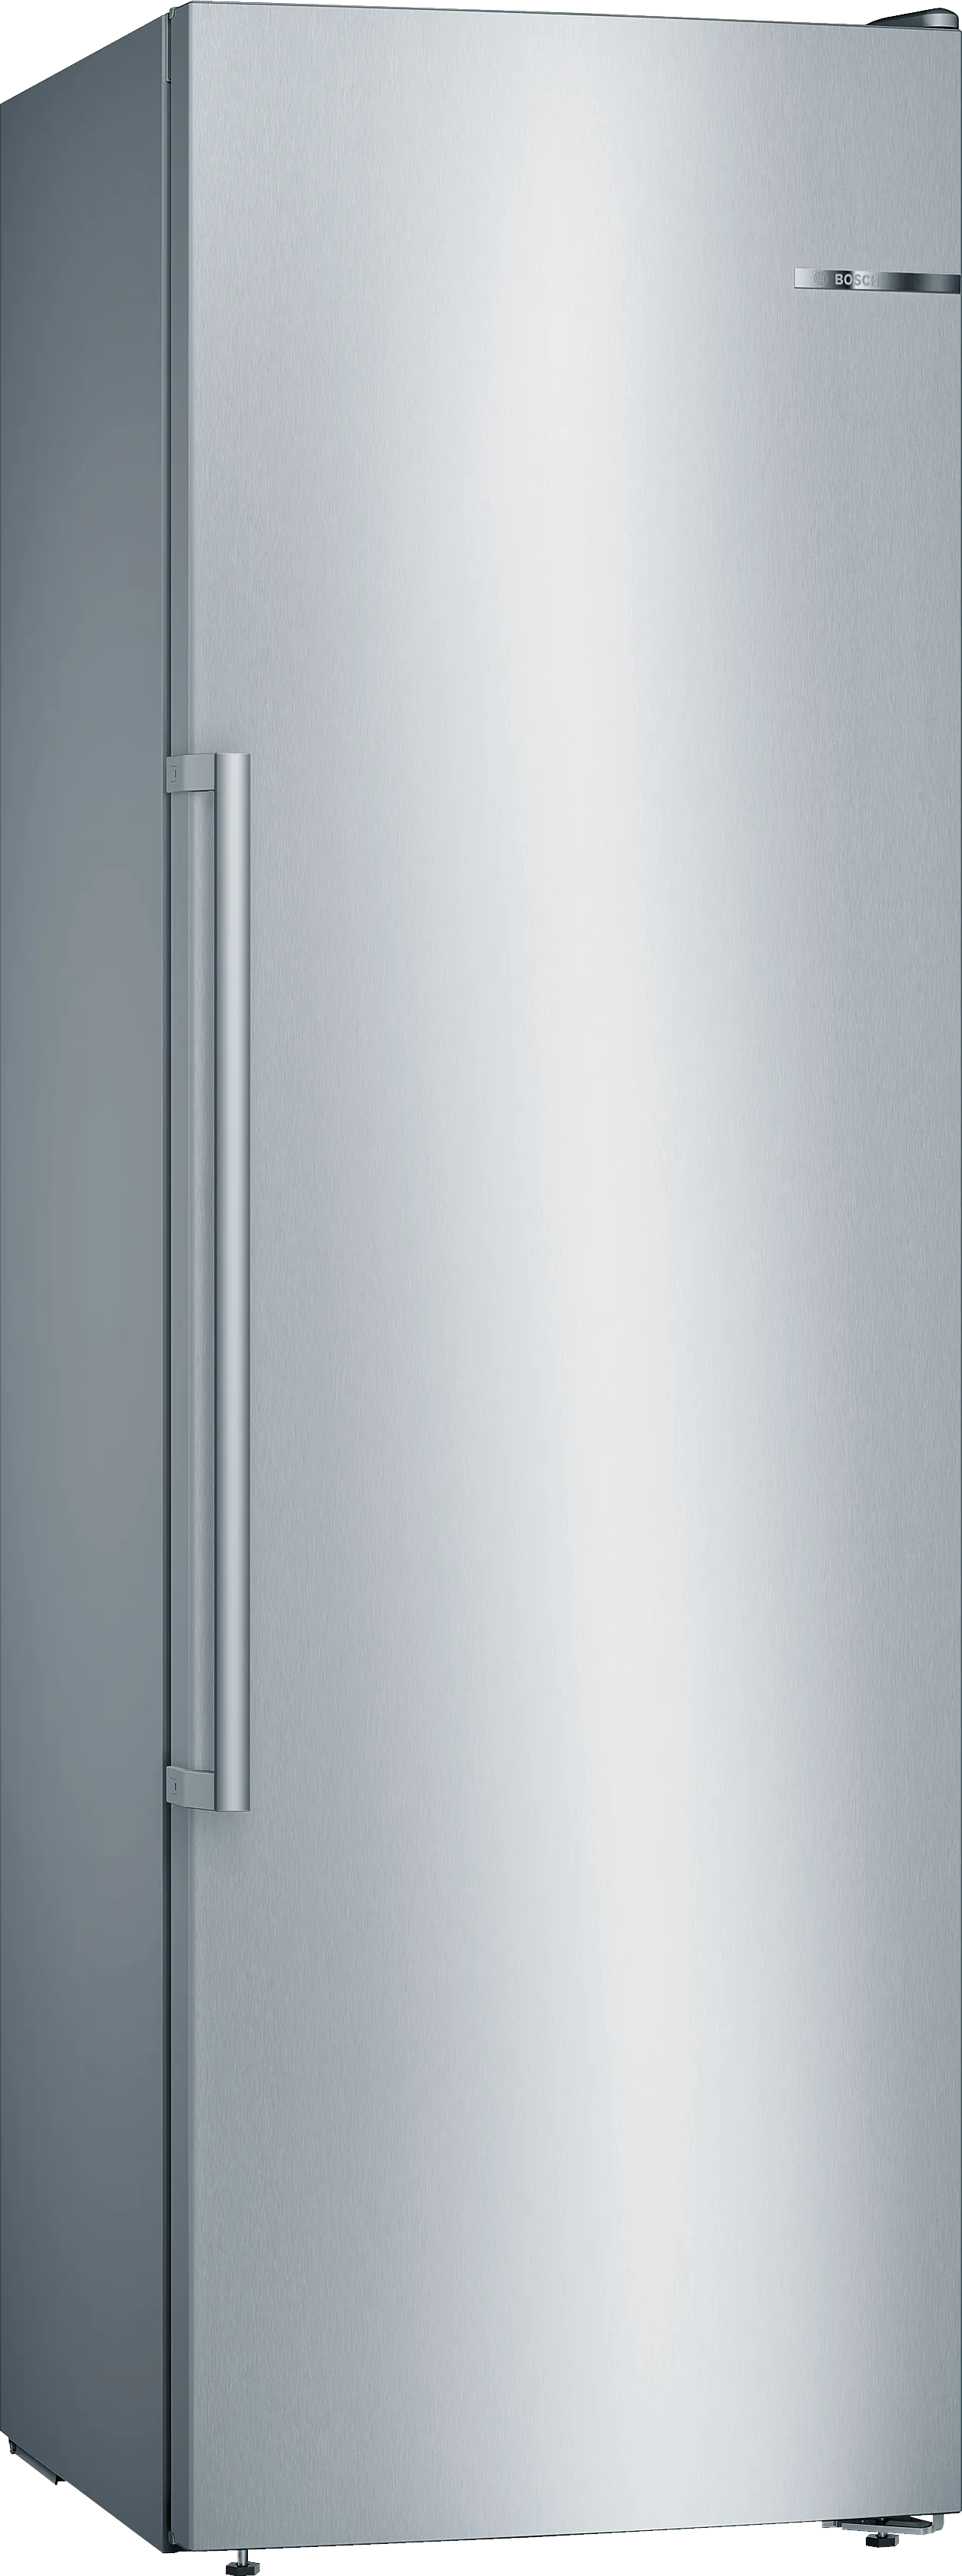 Series 6 free-standing freezer 186 x 60 cm Stainless steel (with anti-fingerprint) 